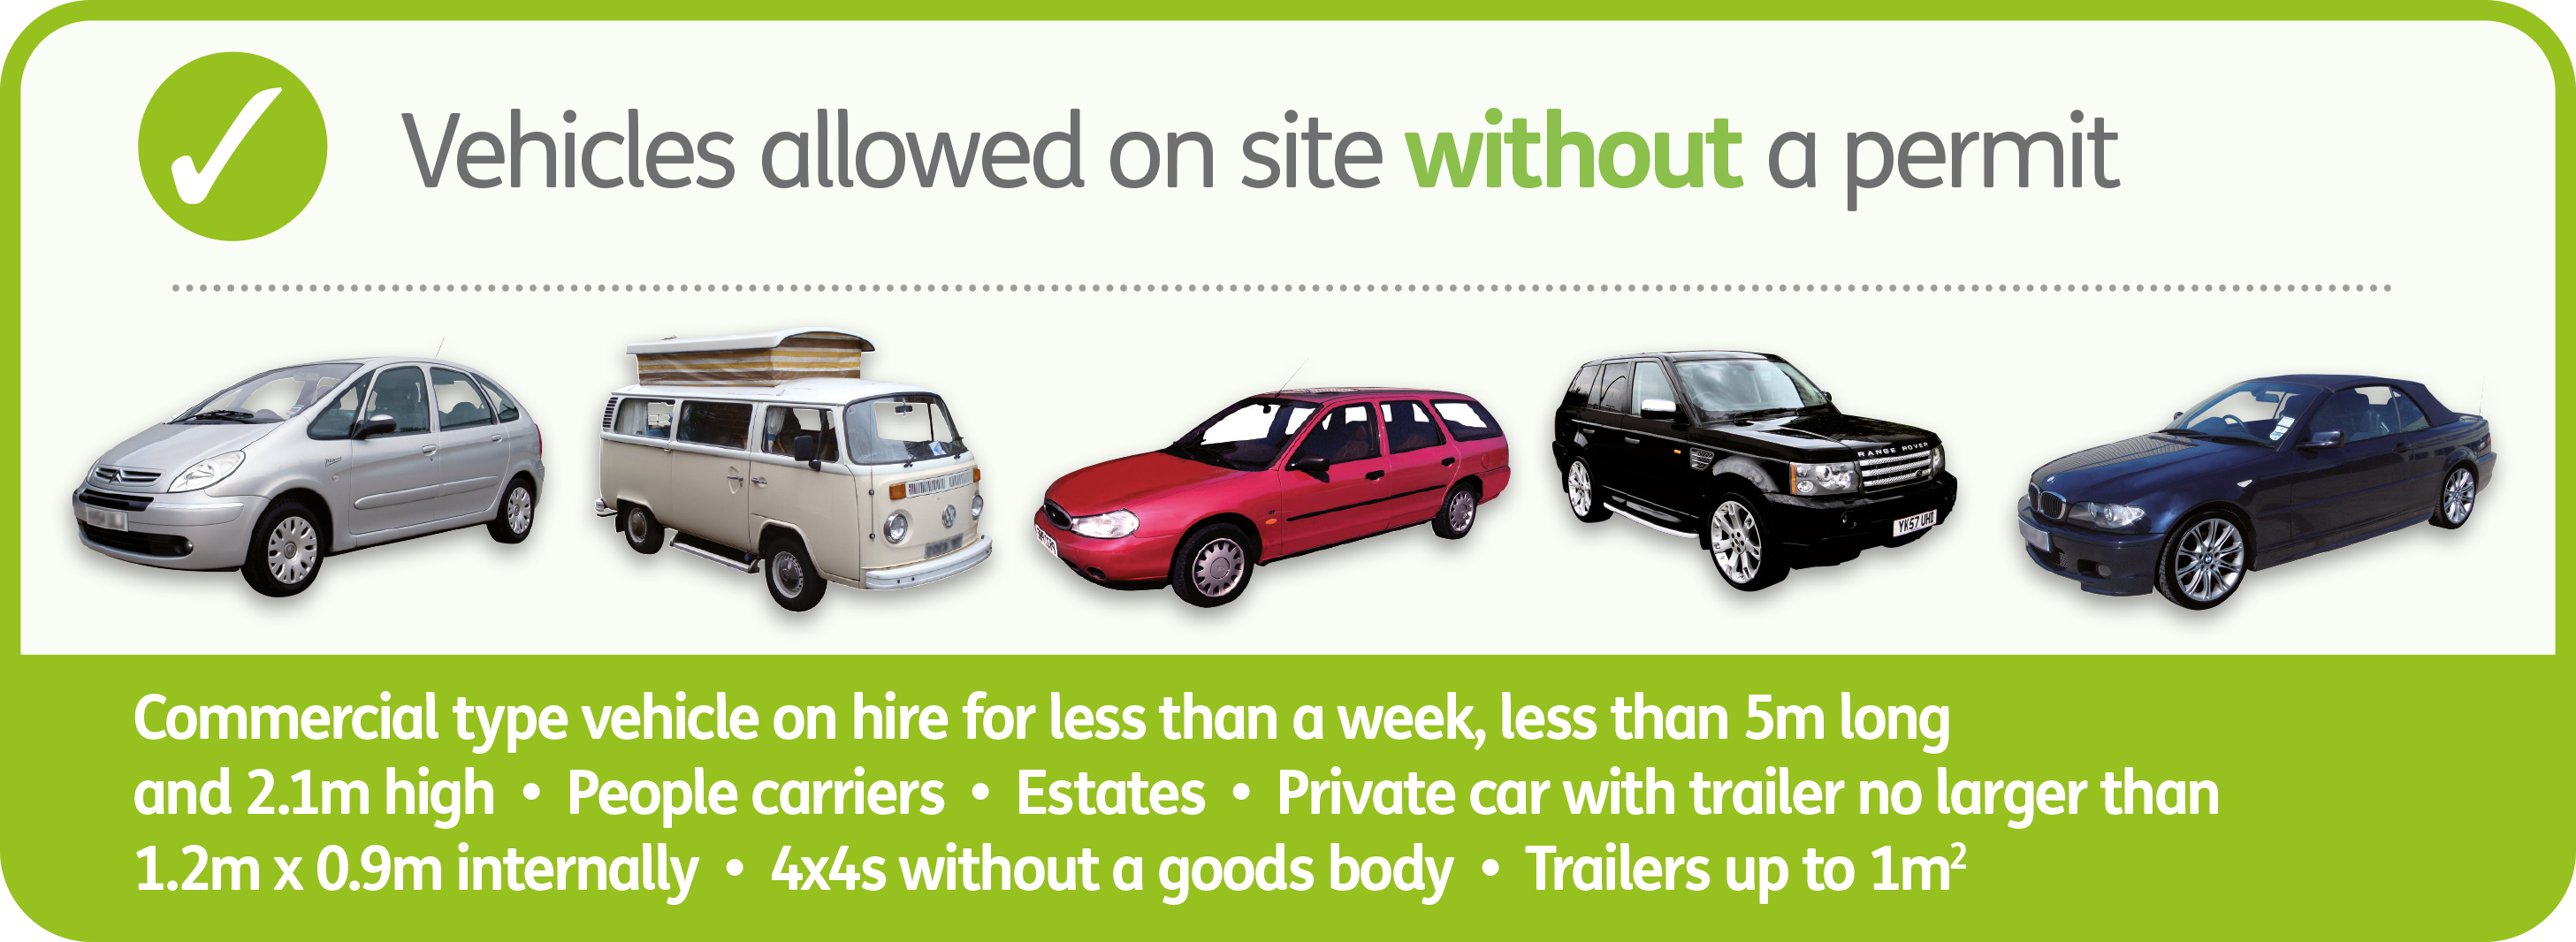 Examples of vehicles allowed on site without a permit